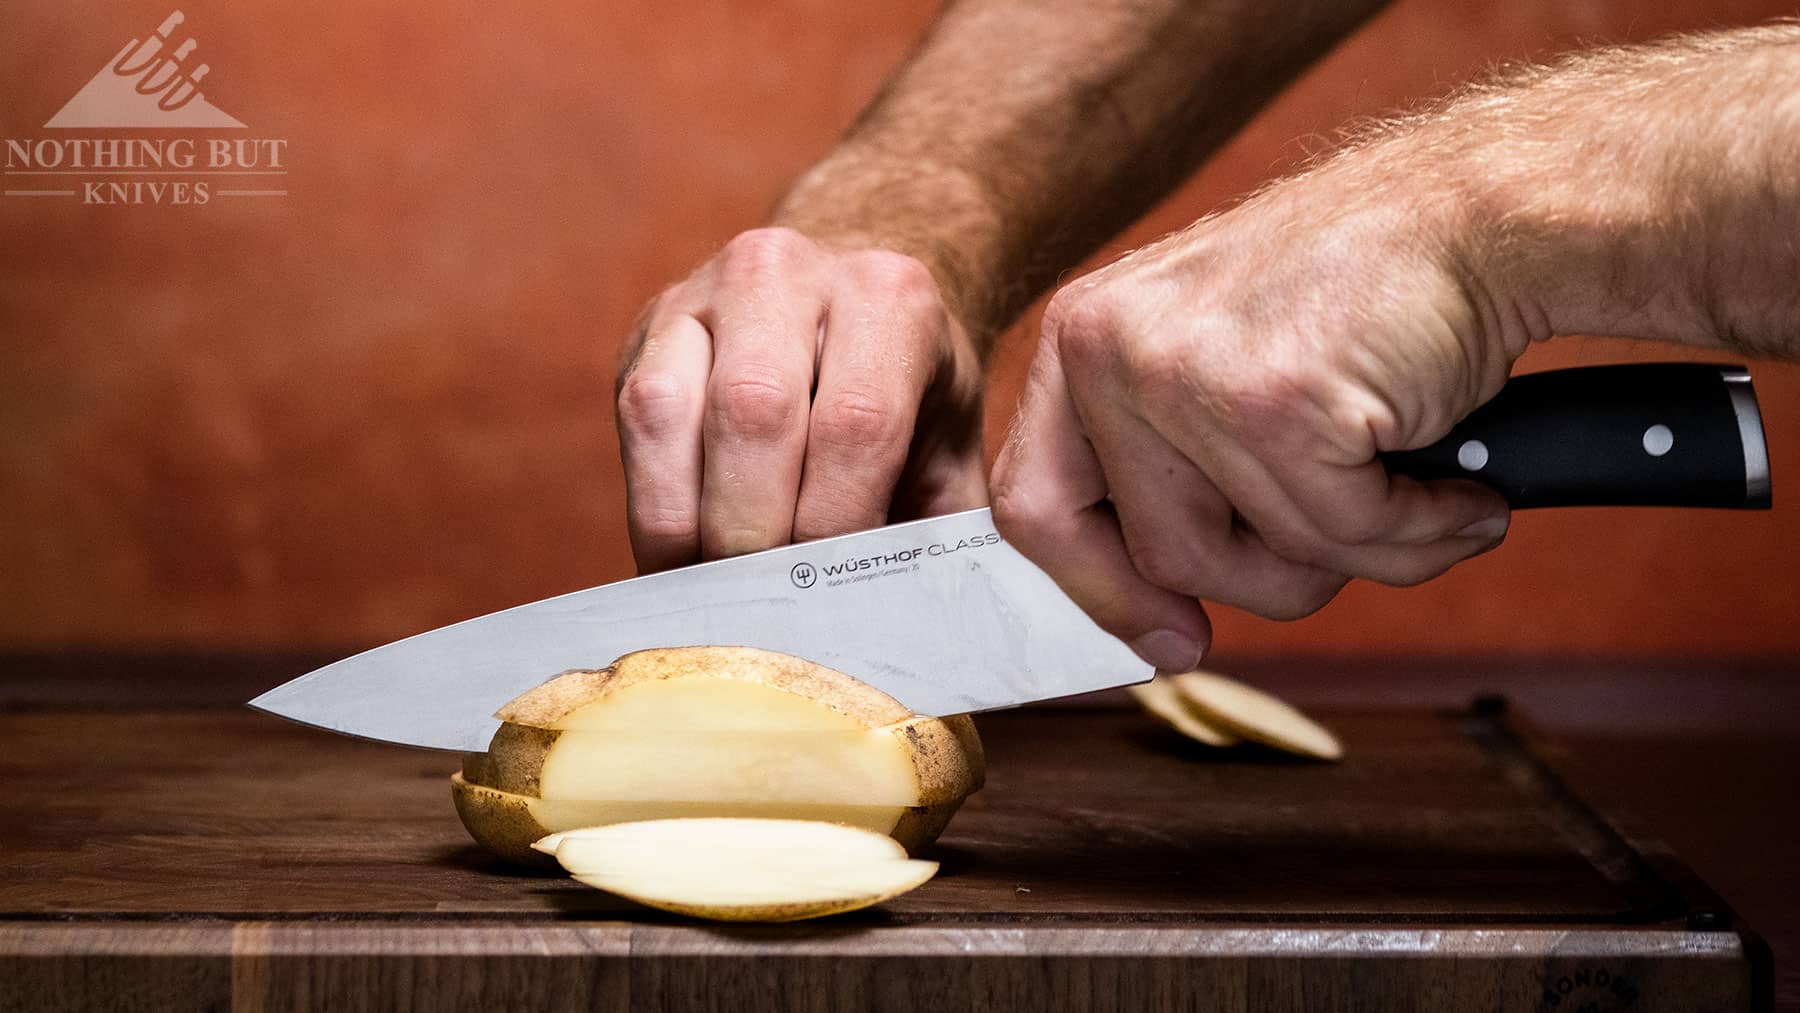 The Classic Ikon chef knife is a capable food prep knife. Its capability is shown here dicing a potato. 